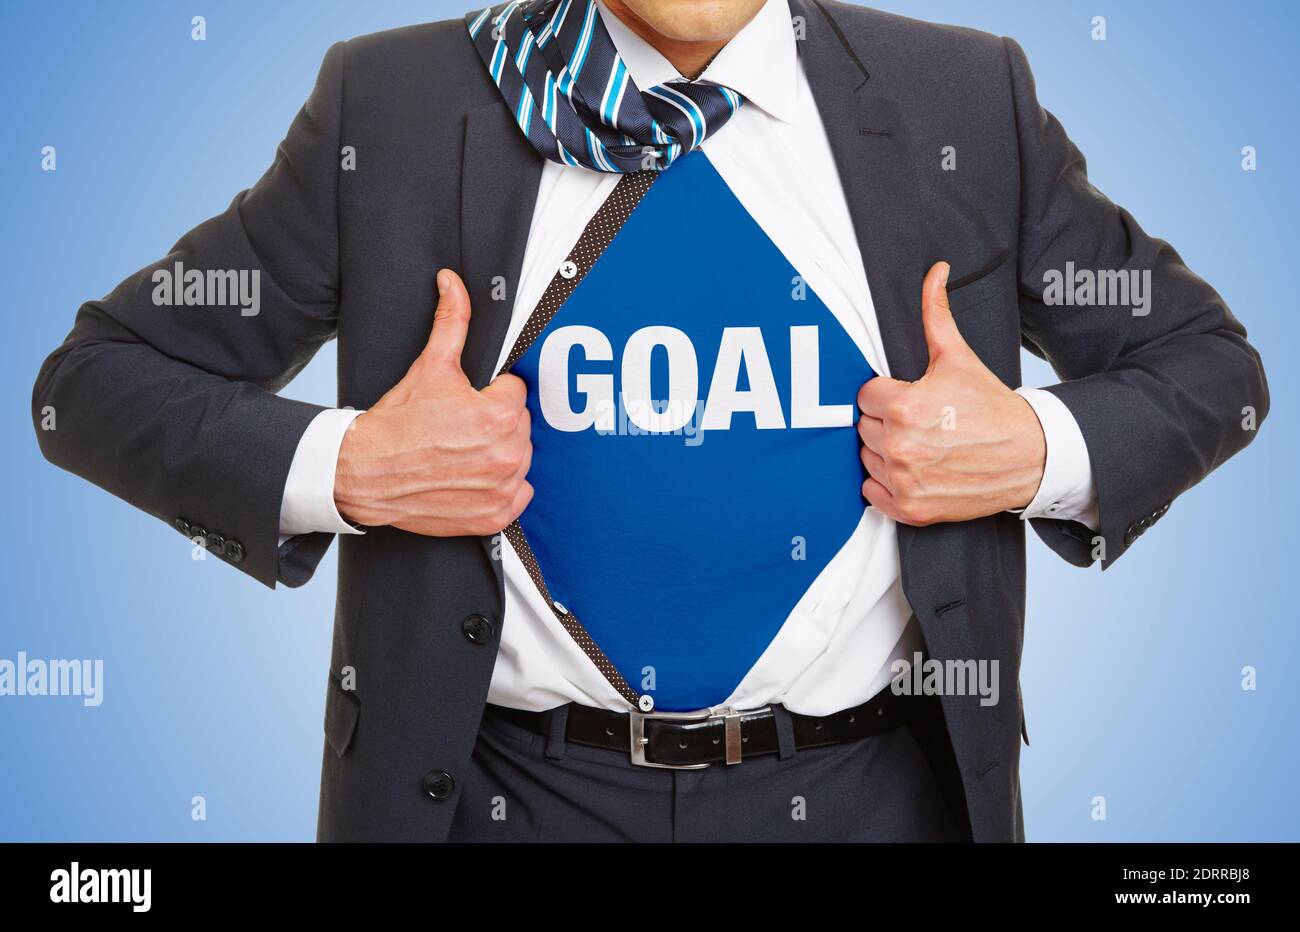 Man in suit opens shirt and wears lettering Goal underneath as success and goal concept Stock Photo